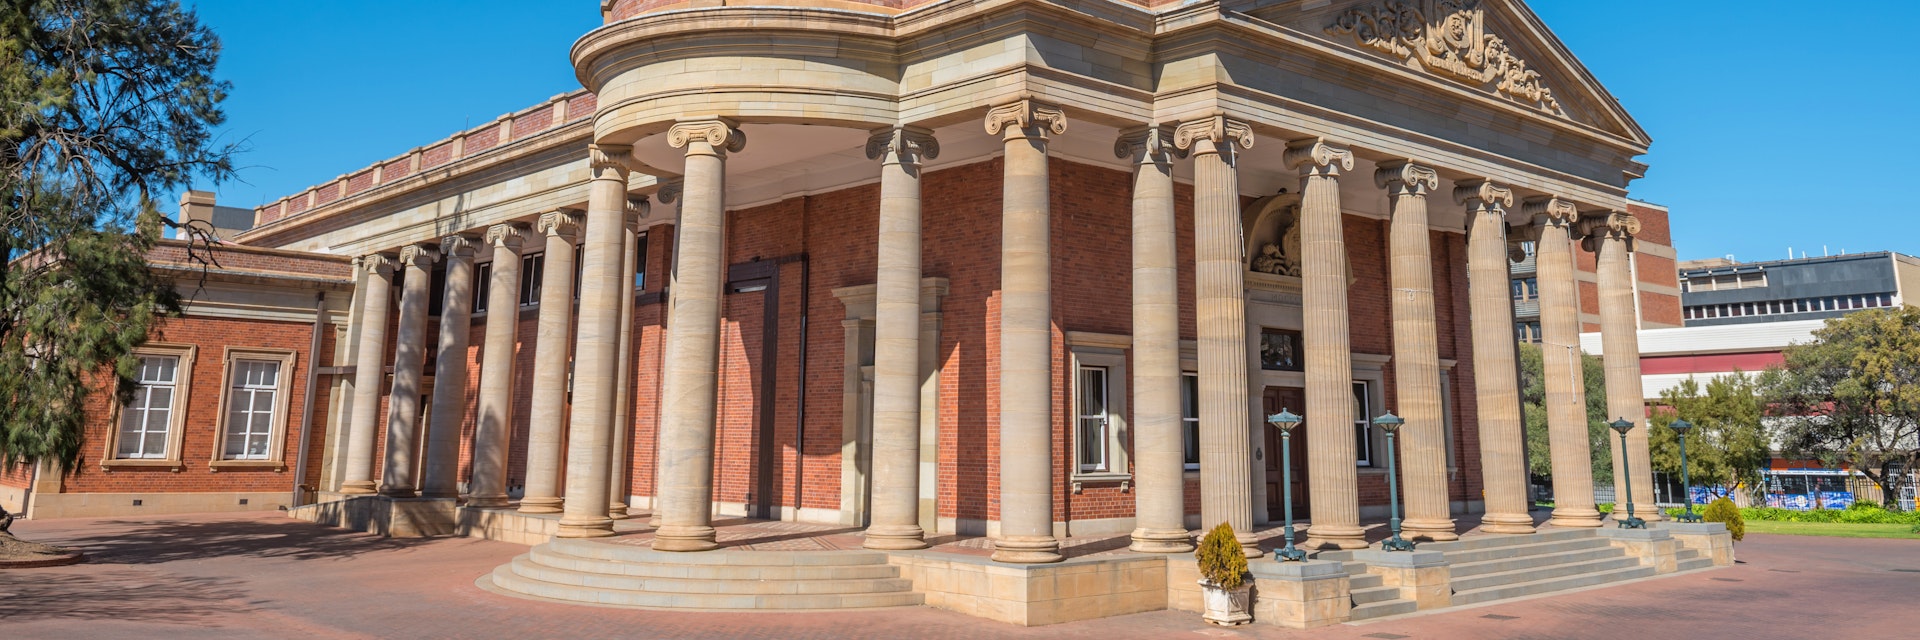 The historical Fourth Raadzaal, seat of Free State Provincial Government was completed in 1892 and is a national monument; Shutterstock ID 299500955; Your name (First / Last): Tom Stainer; GL account no.: 65050; Netsuite department name: Online Editorial; Full Product or Project name including edition: south africa article